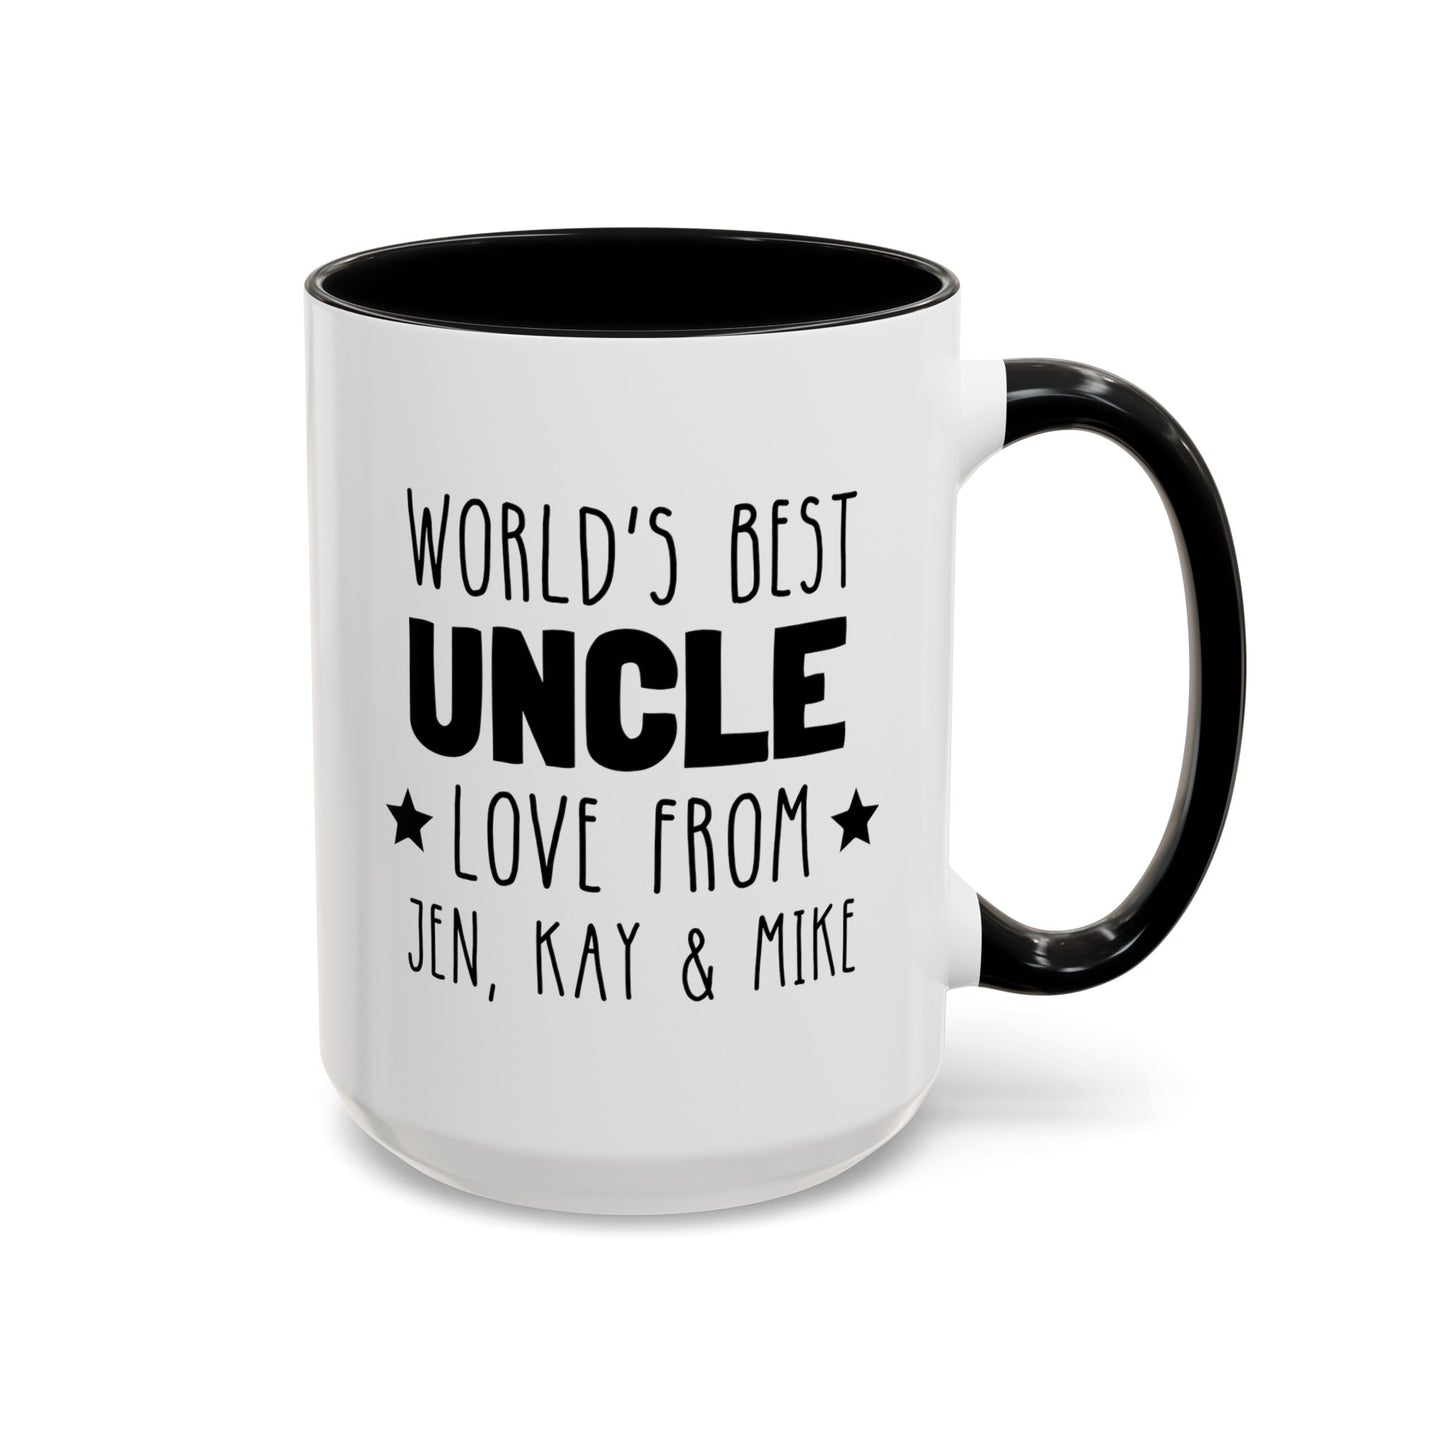 Personalized World's Best Uncle 15oz white with black accent funny large coffee mug gift for fun uncle funcle love from nephew niece custom names waveywares wavey wares wavywares wavy wares